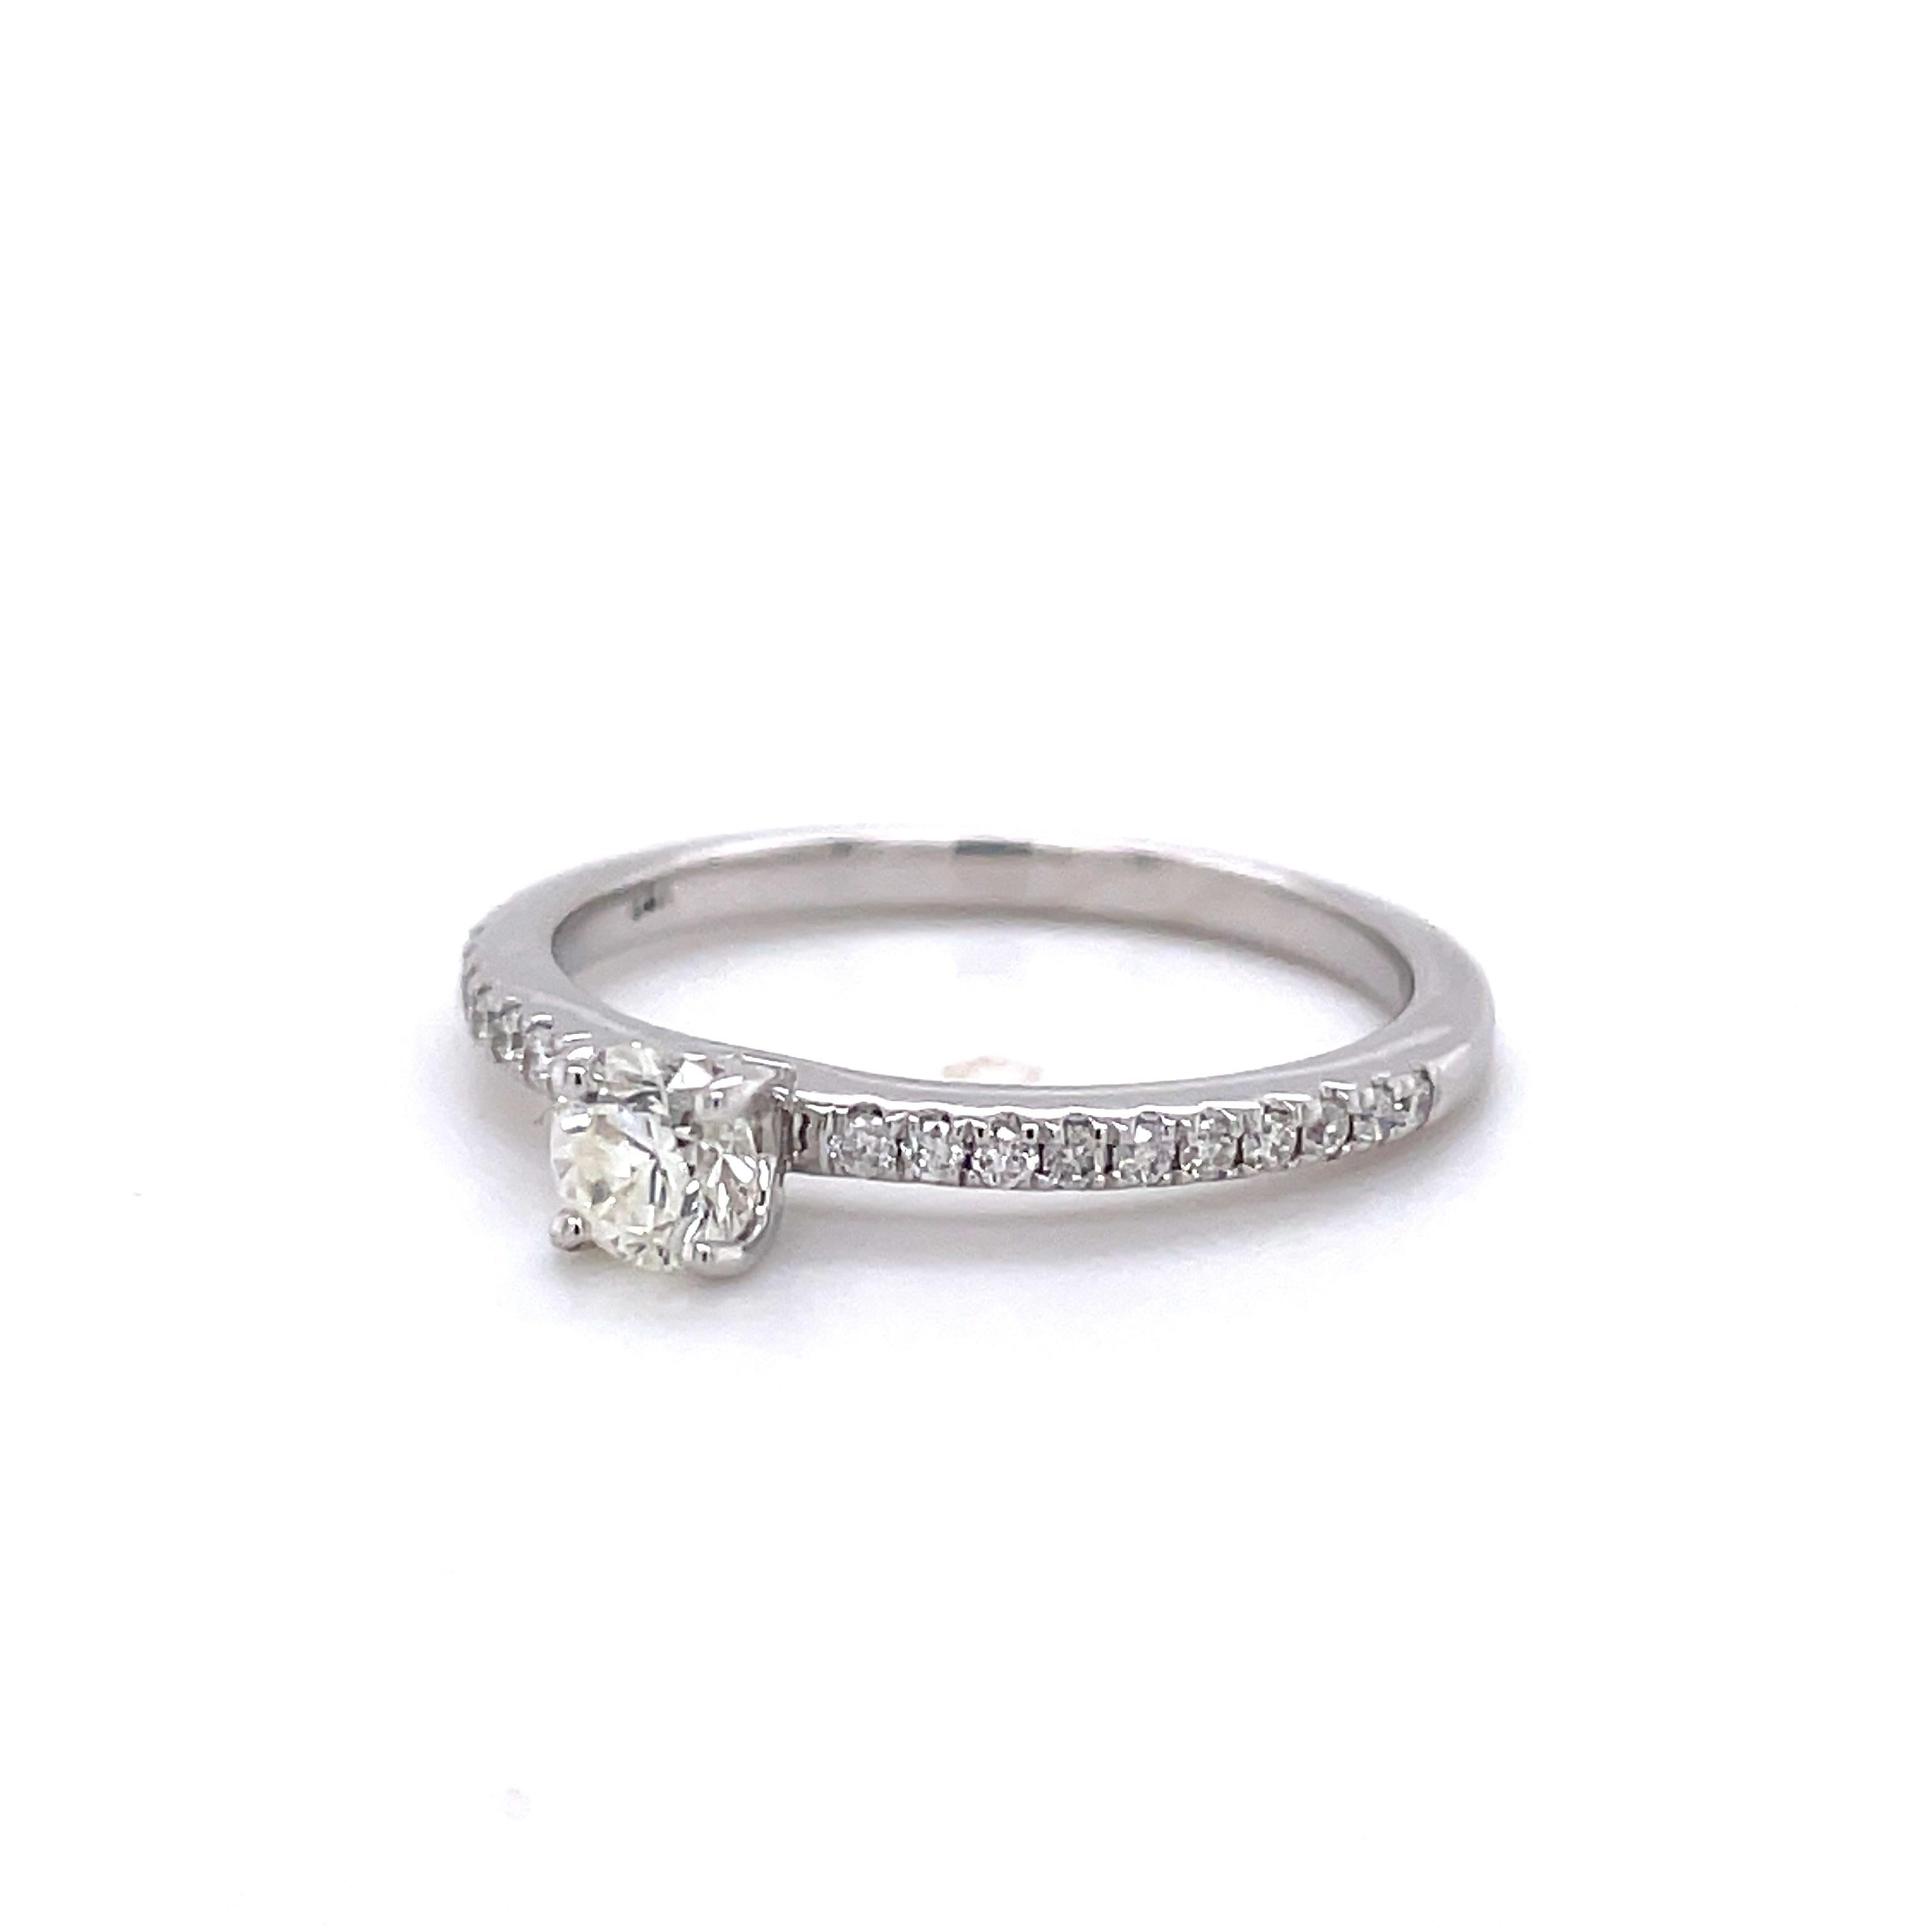 This stunning and elegant diamond ring has a beautiful 0.29 ct (I-J Color, SI2-I1 Clarity) round brilliant diamond in the center with an additional 20 diamonds weighing 0.29 cttw (H-I Color, I1 Clarity) accenting the sides. The ring is crafted in